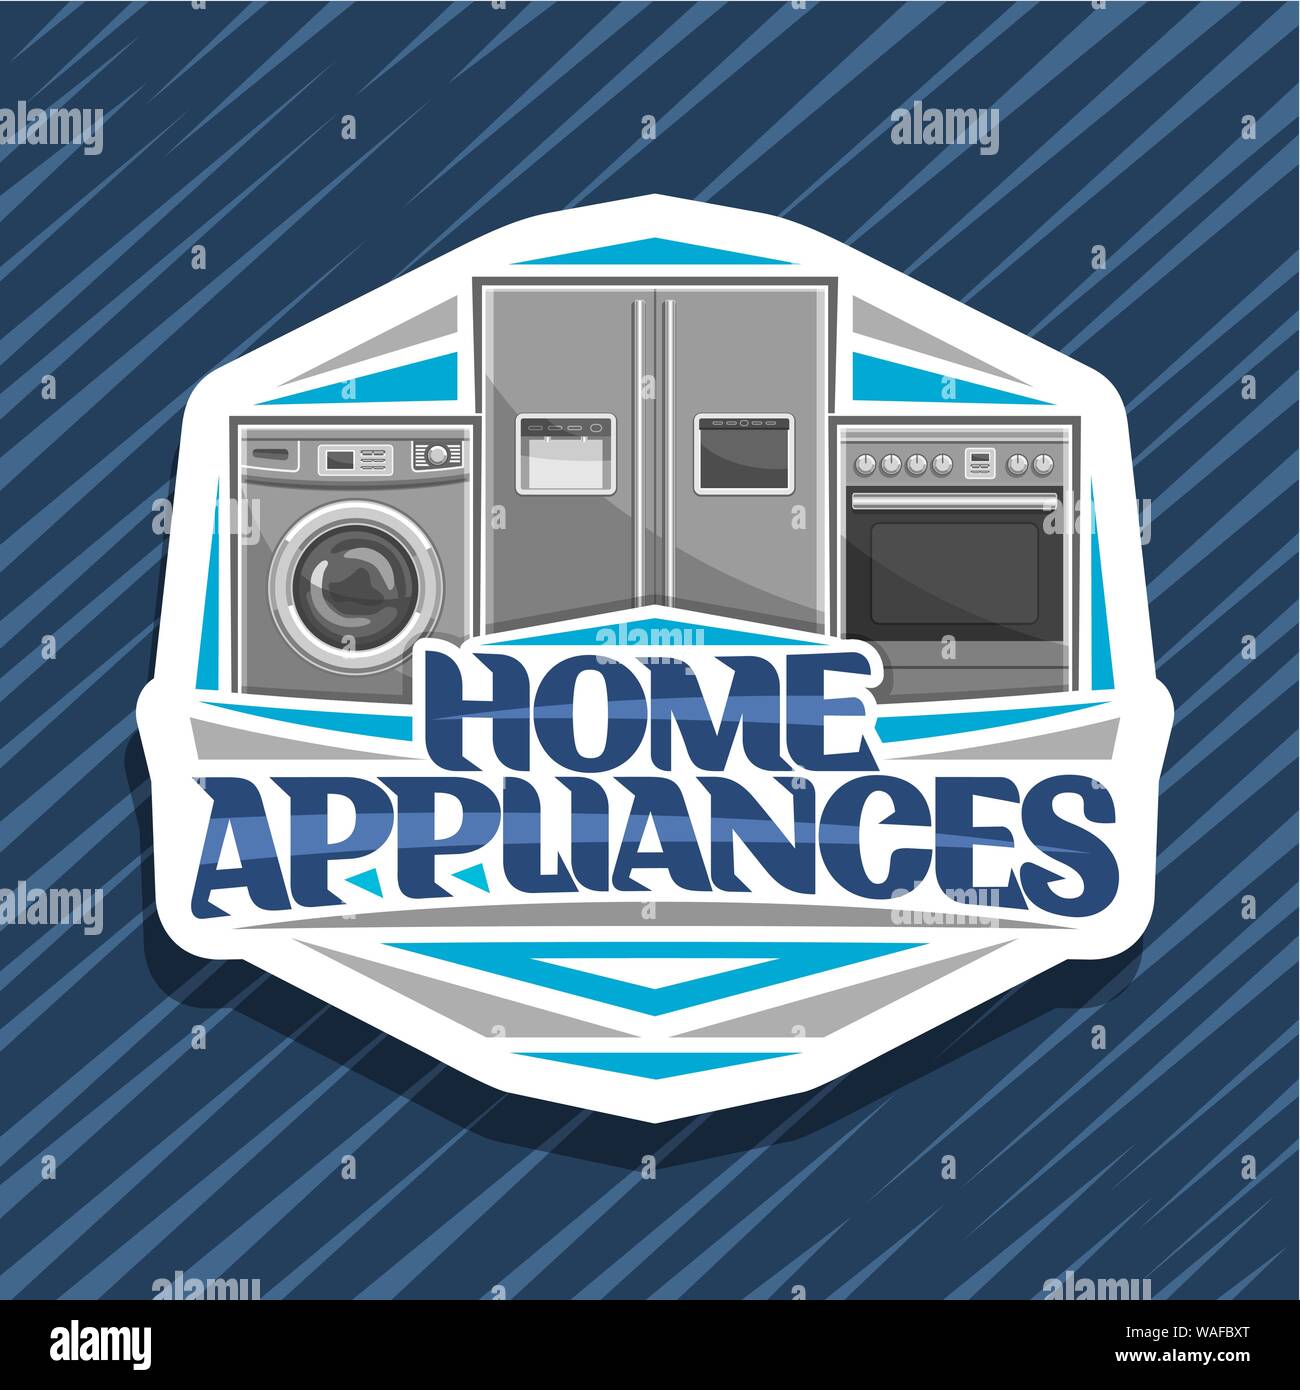 Vector logo for Home Appliances, cut paper sign with illustration of chrome washing machine, large fridge with screen, electric cooker, original lette Stock Vector